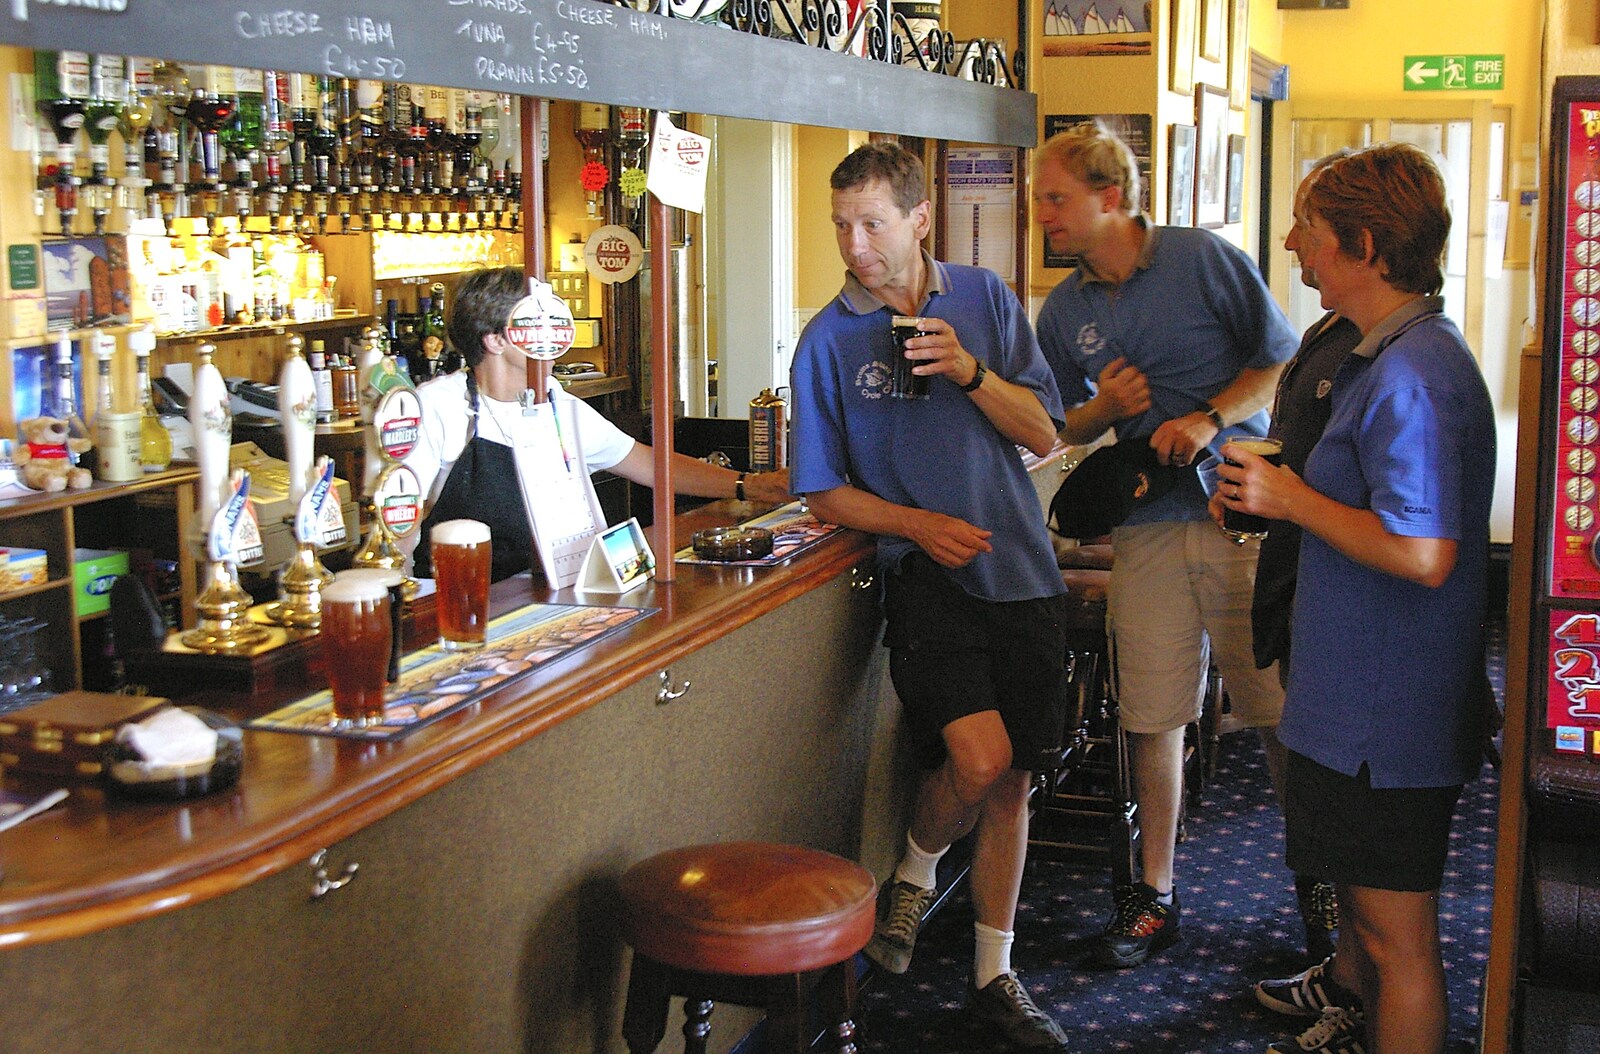 Apple John at the bar from The BSCC Charity Bike Ride, Orford, Suffolk - 15th July 2006